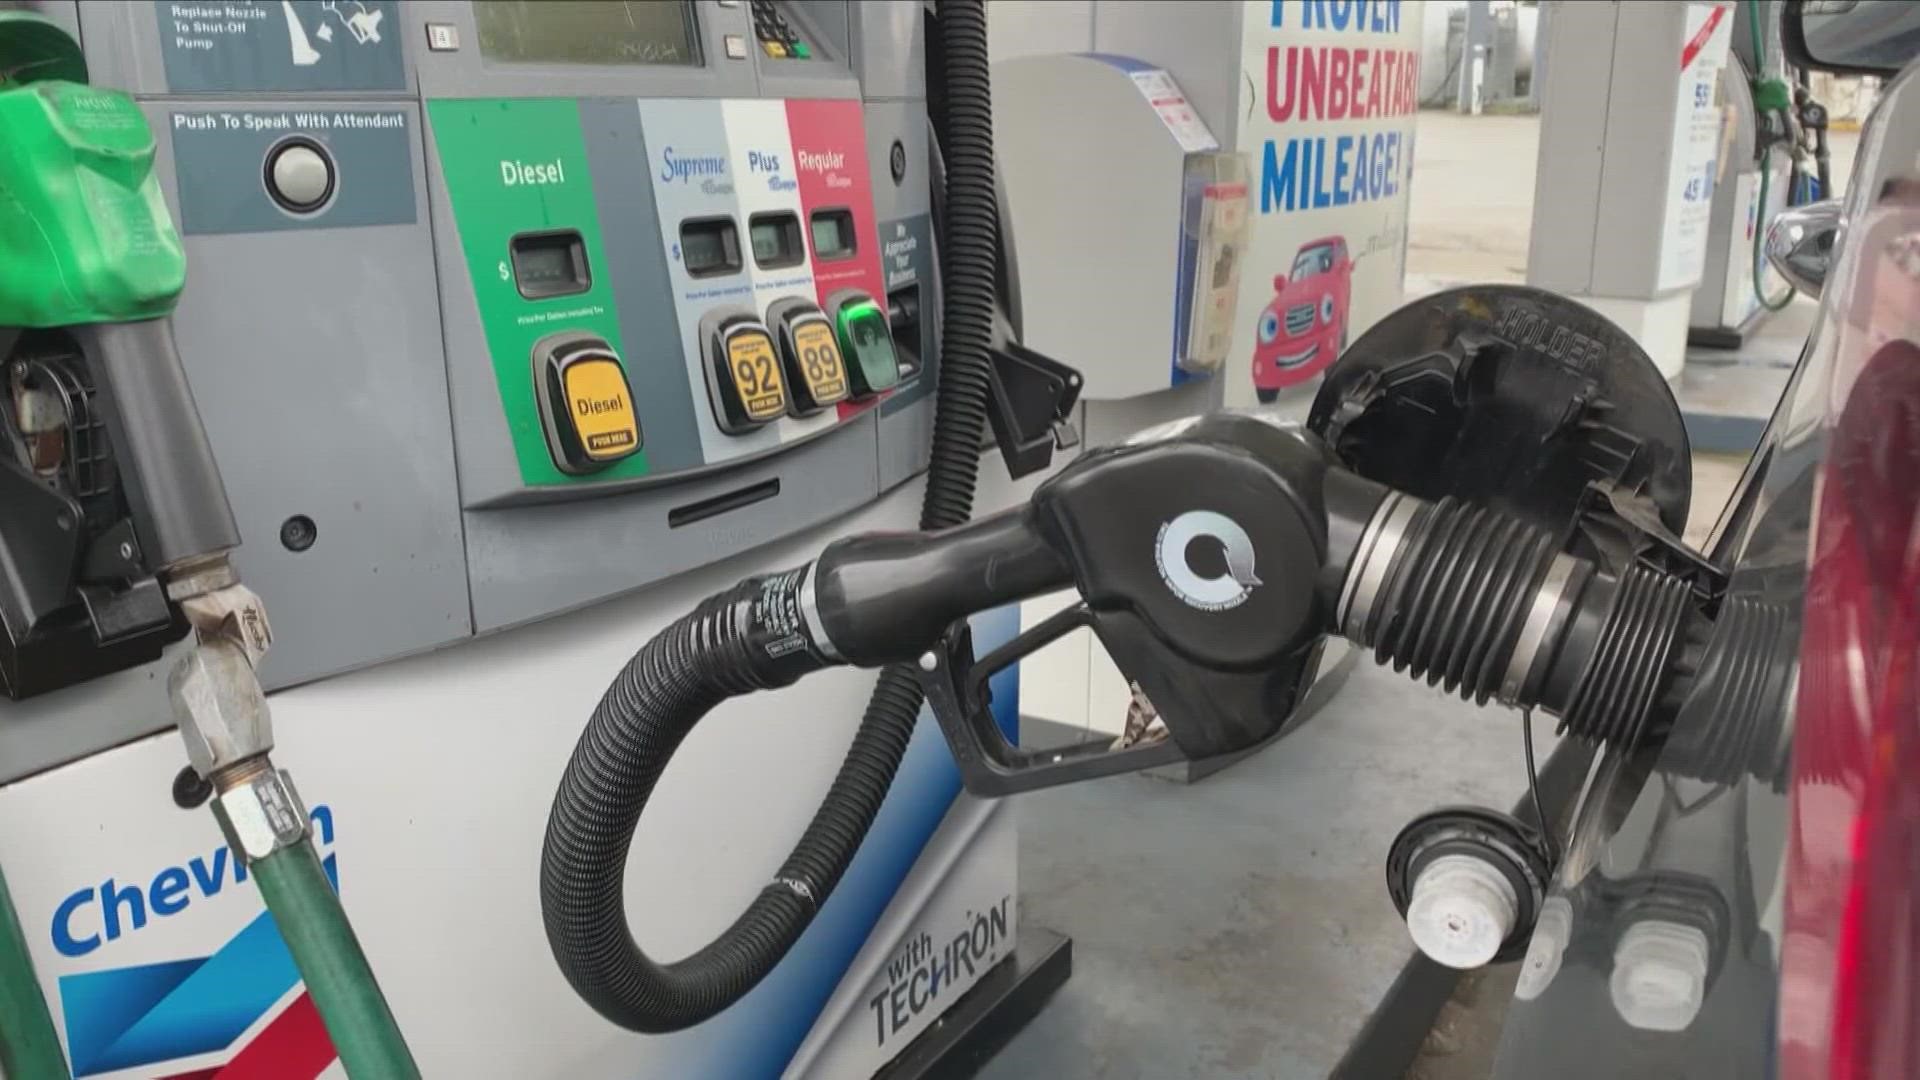 The average gas price in the state hit $4.449 per gallon Monday, and it will likely continue to go up.